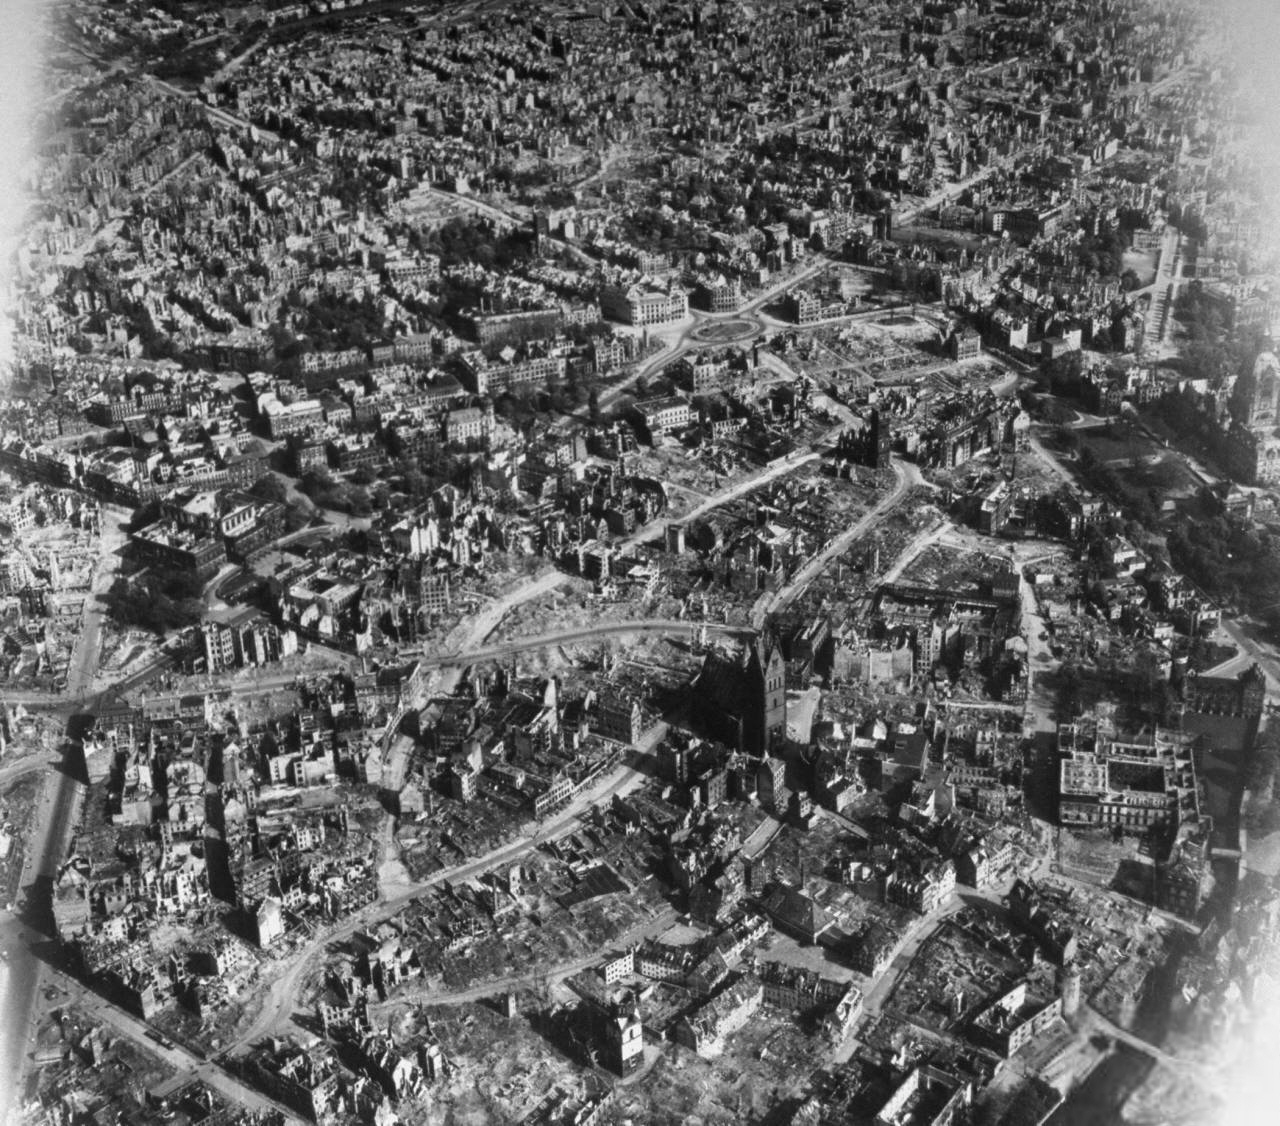 Hannover, Germany in ruins, 1945